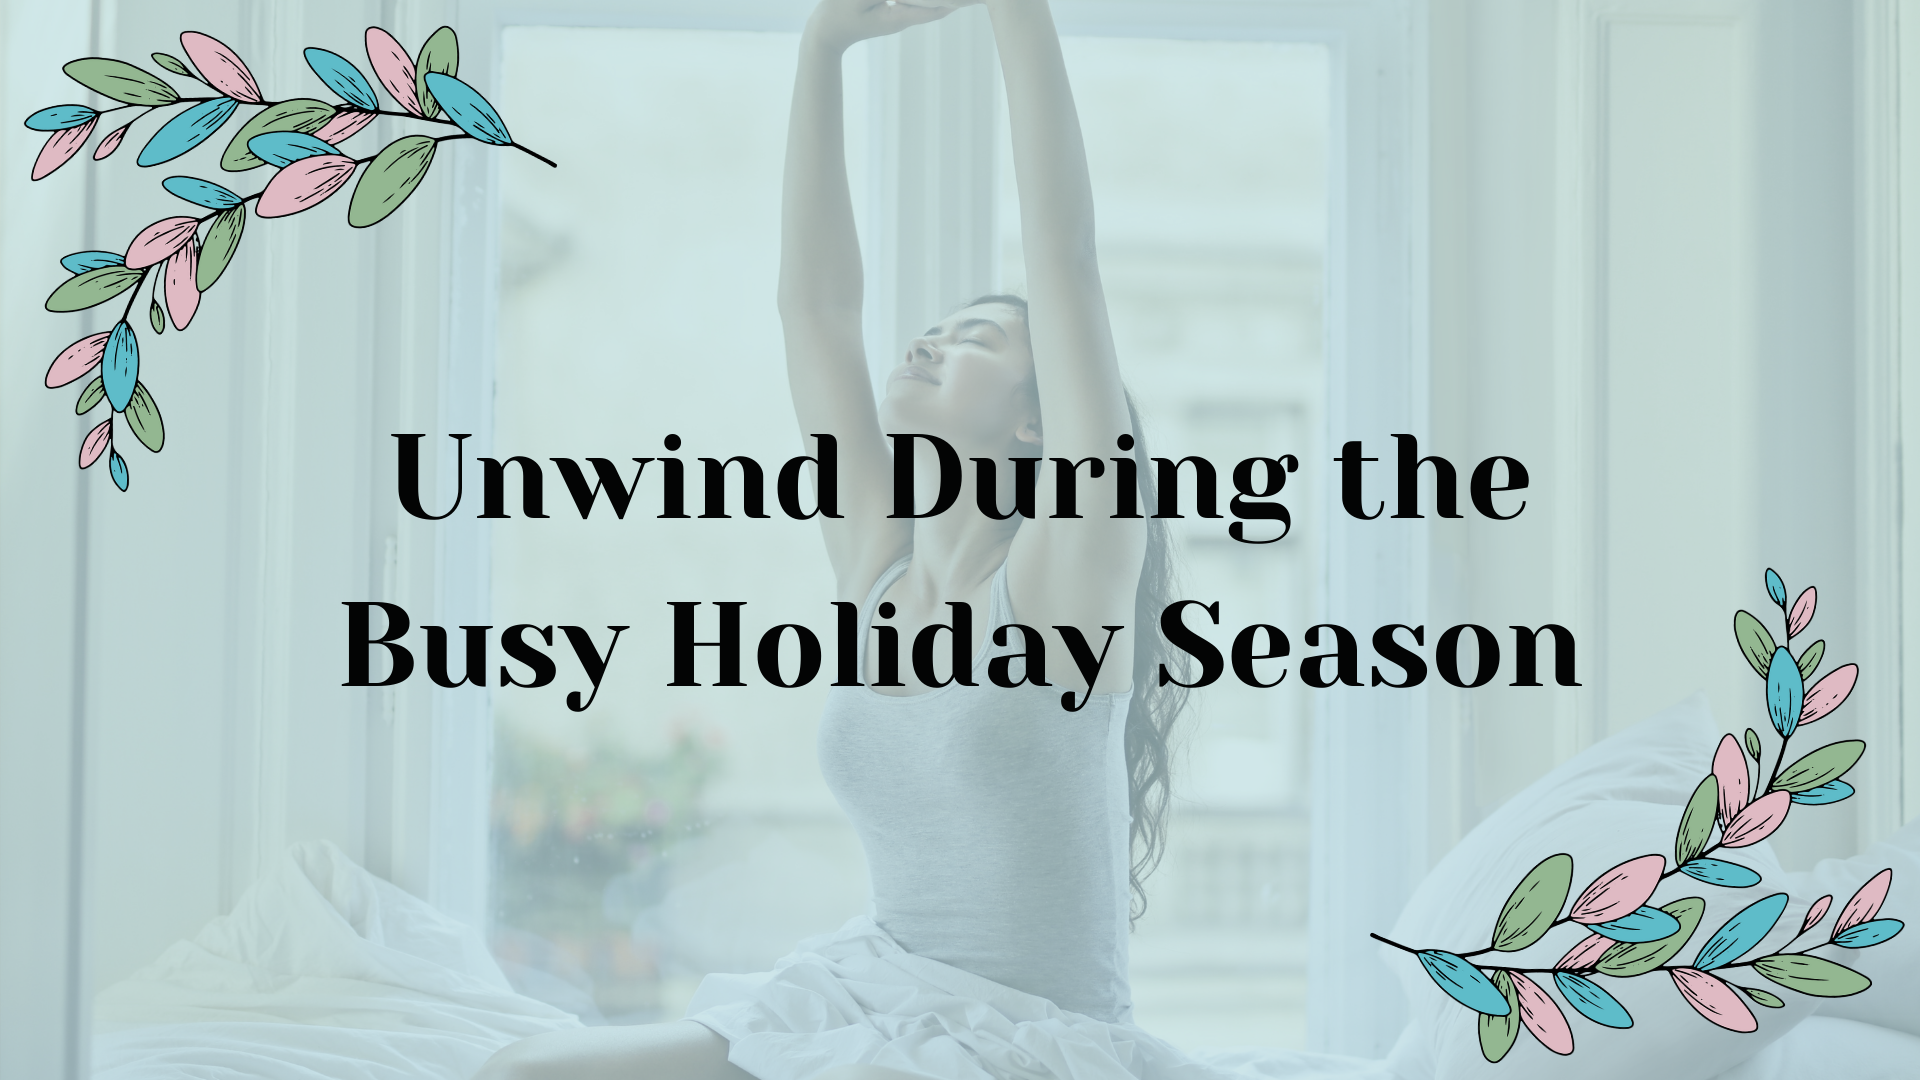 Unwind During the Busy Holiday Season